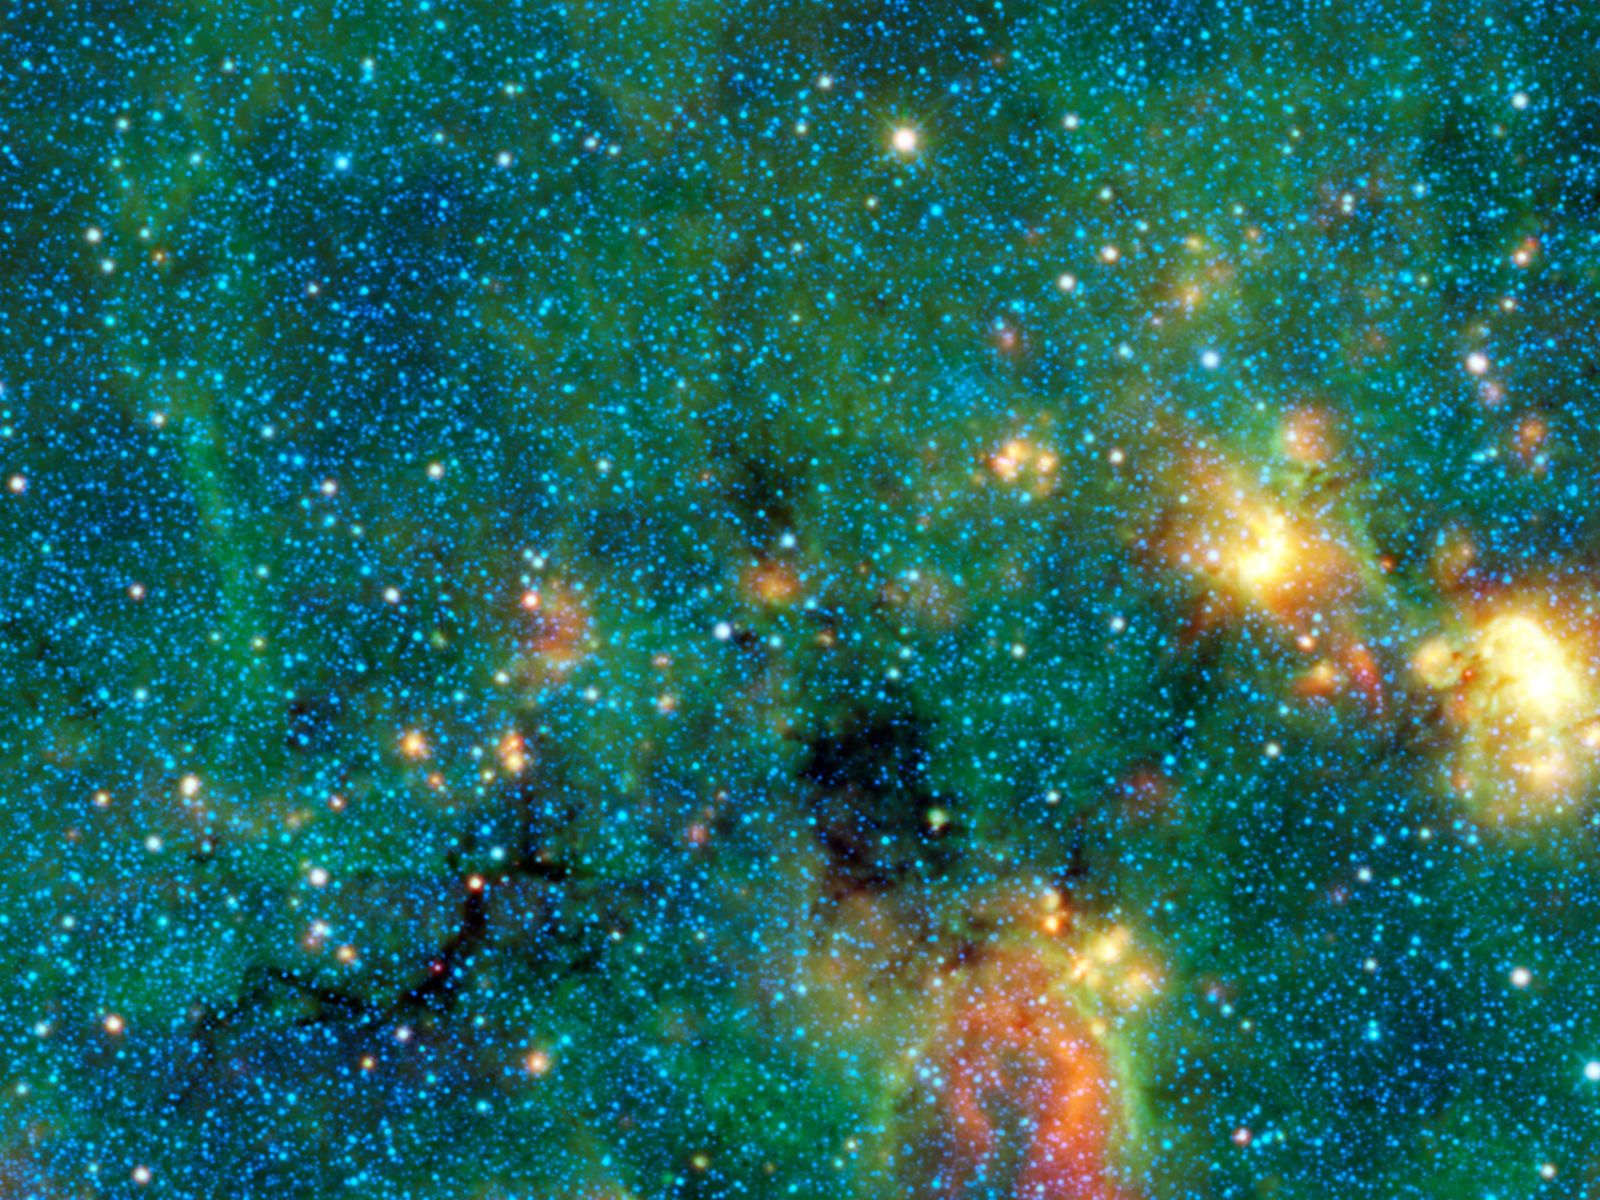 Space Images | Dark Murky Clouds in the Bright Milky Way